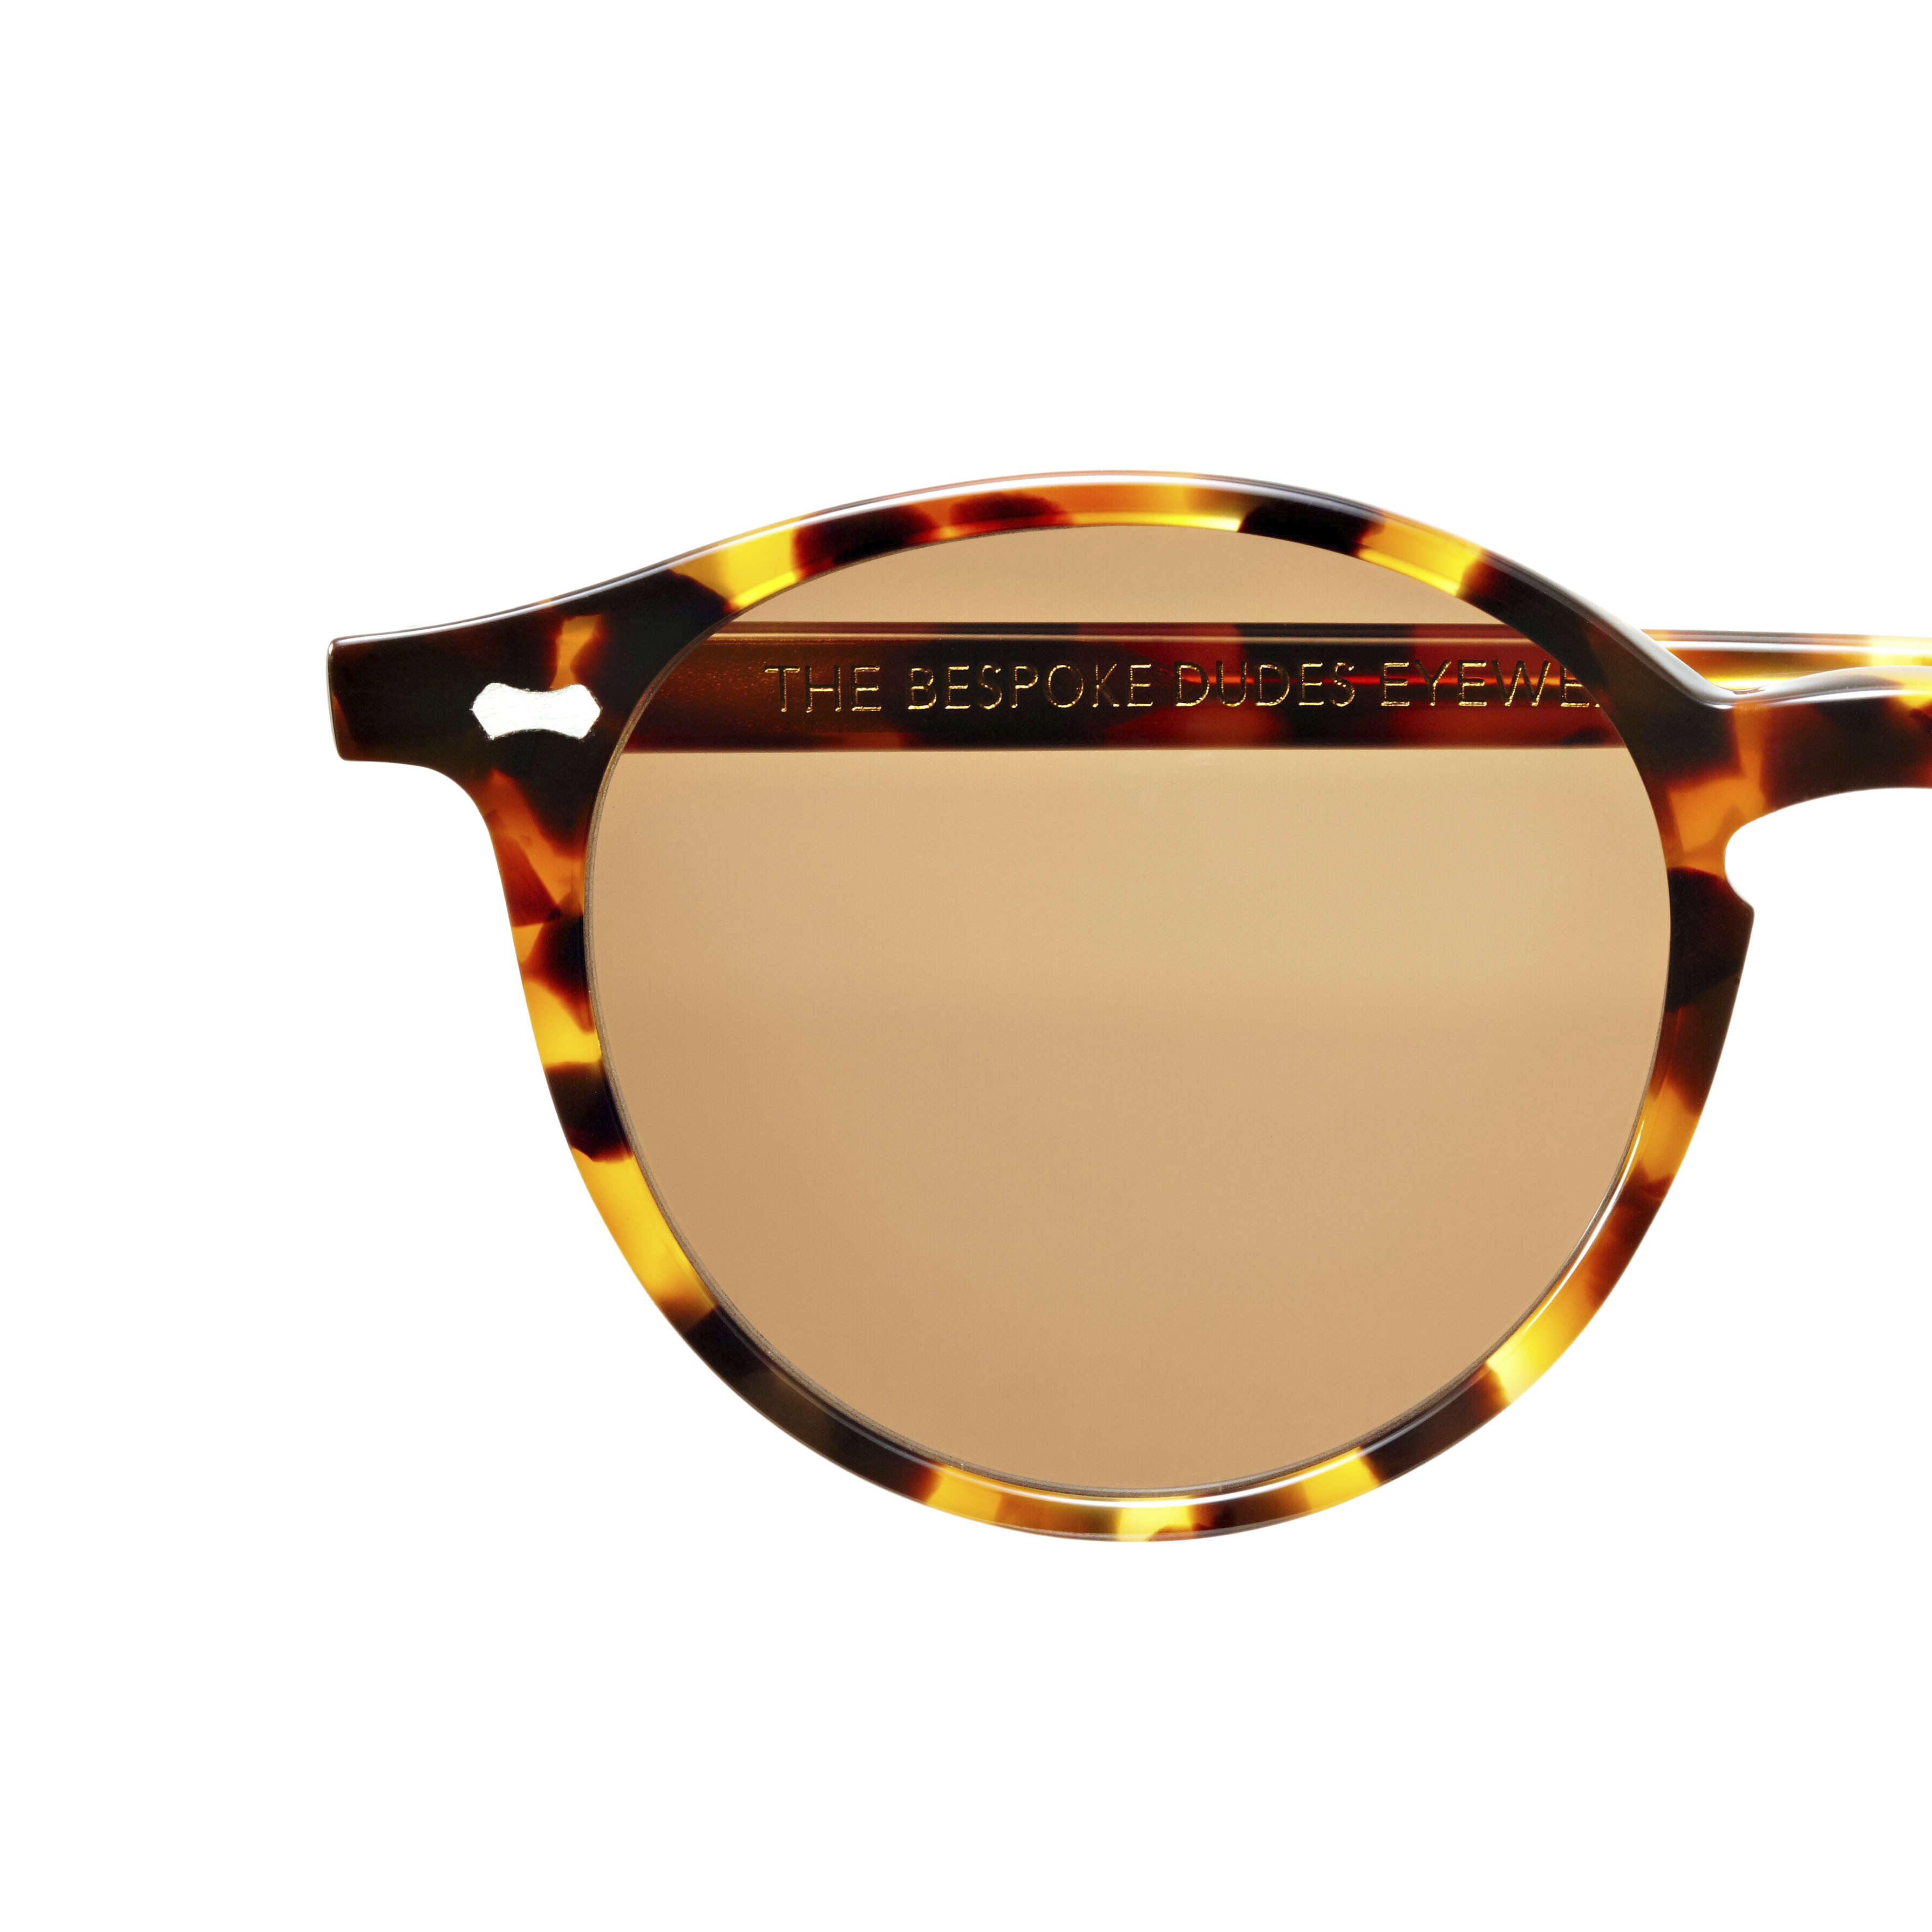 Cran Amber Tortoise Tobacco Lenses sunglasses by The Bespoke Dudes on a white background.